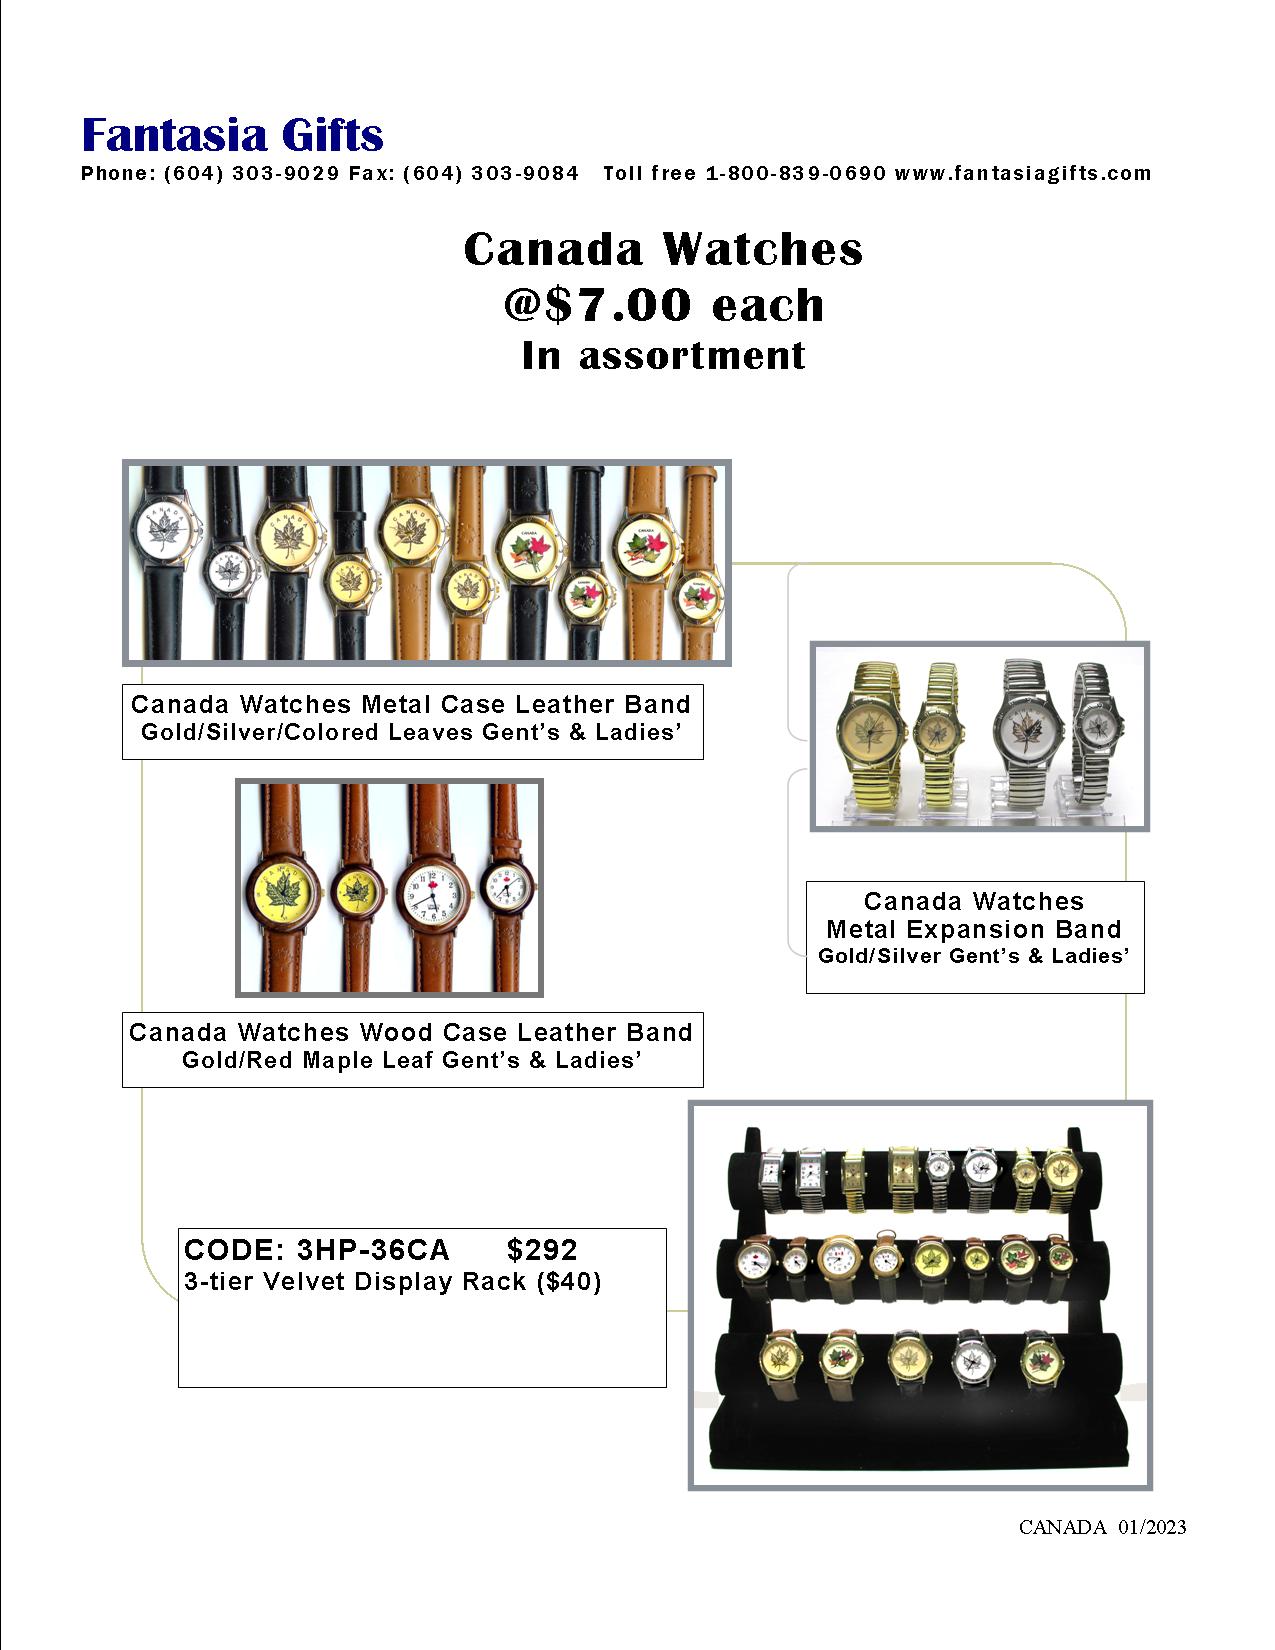 3HP-36CA Canada Watches